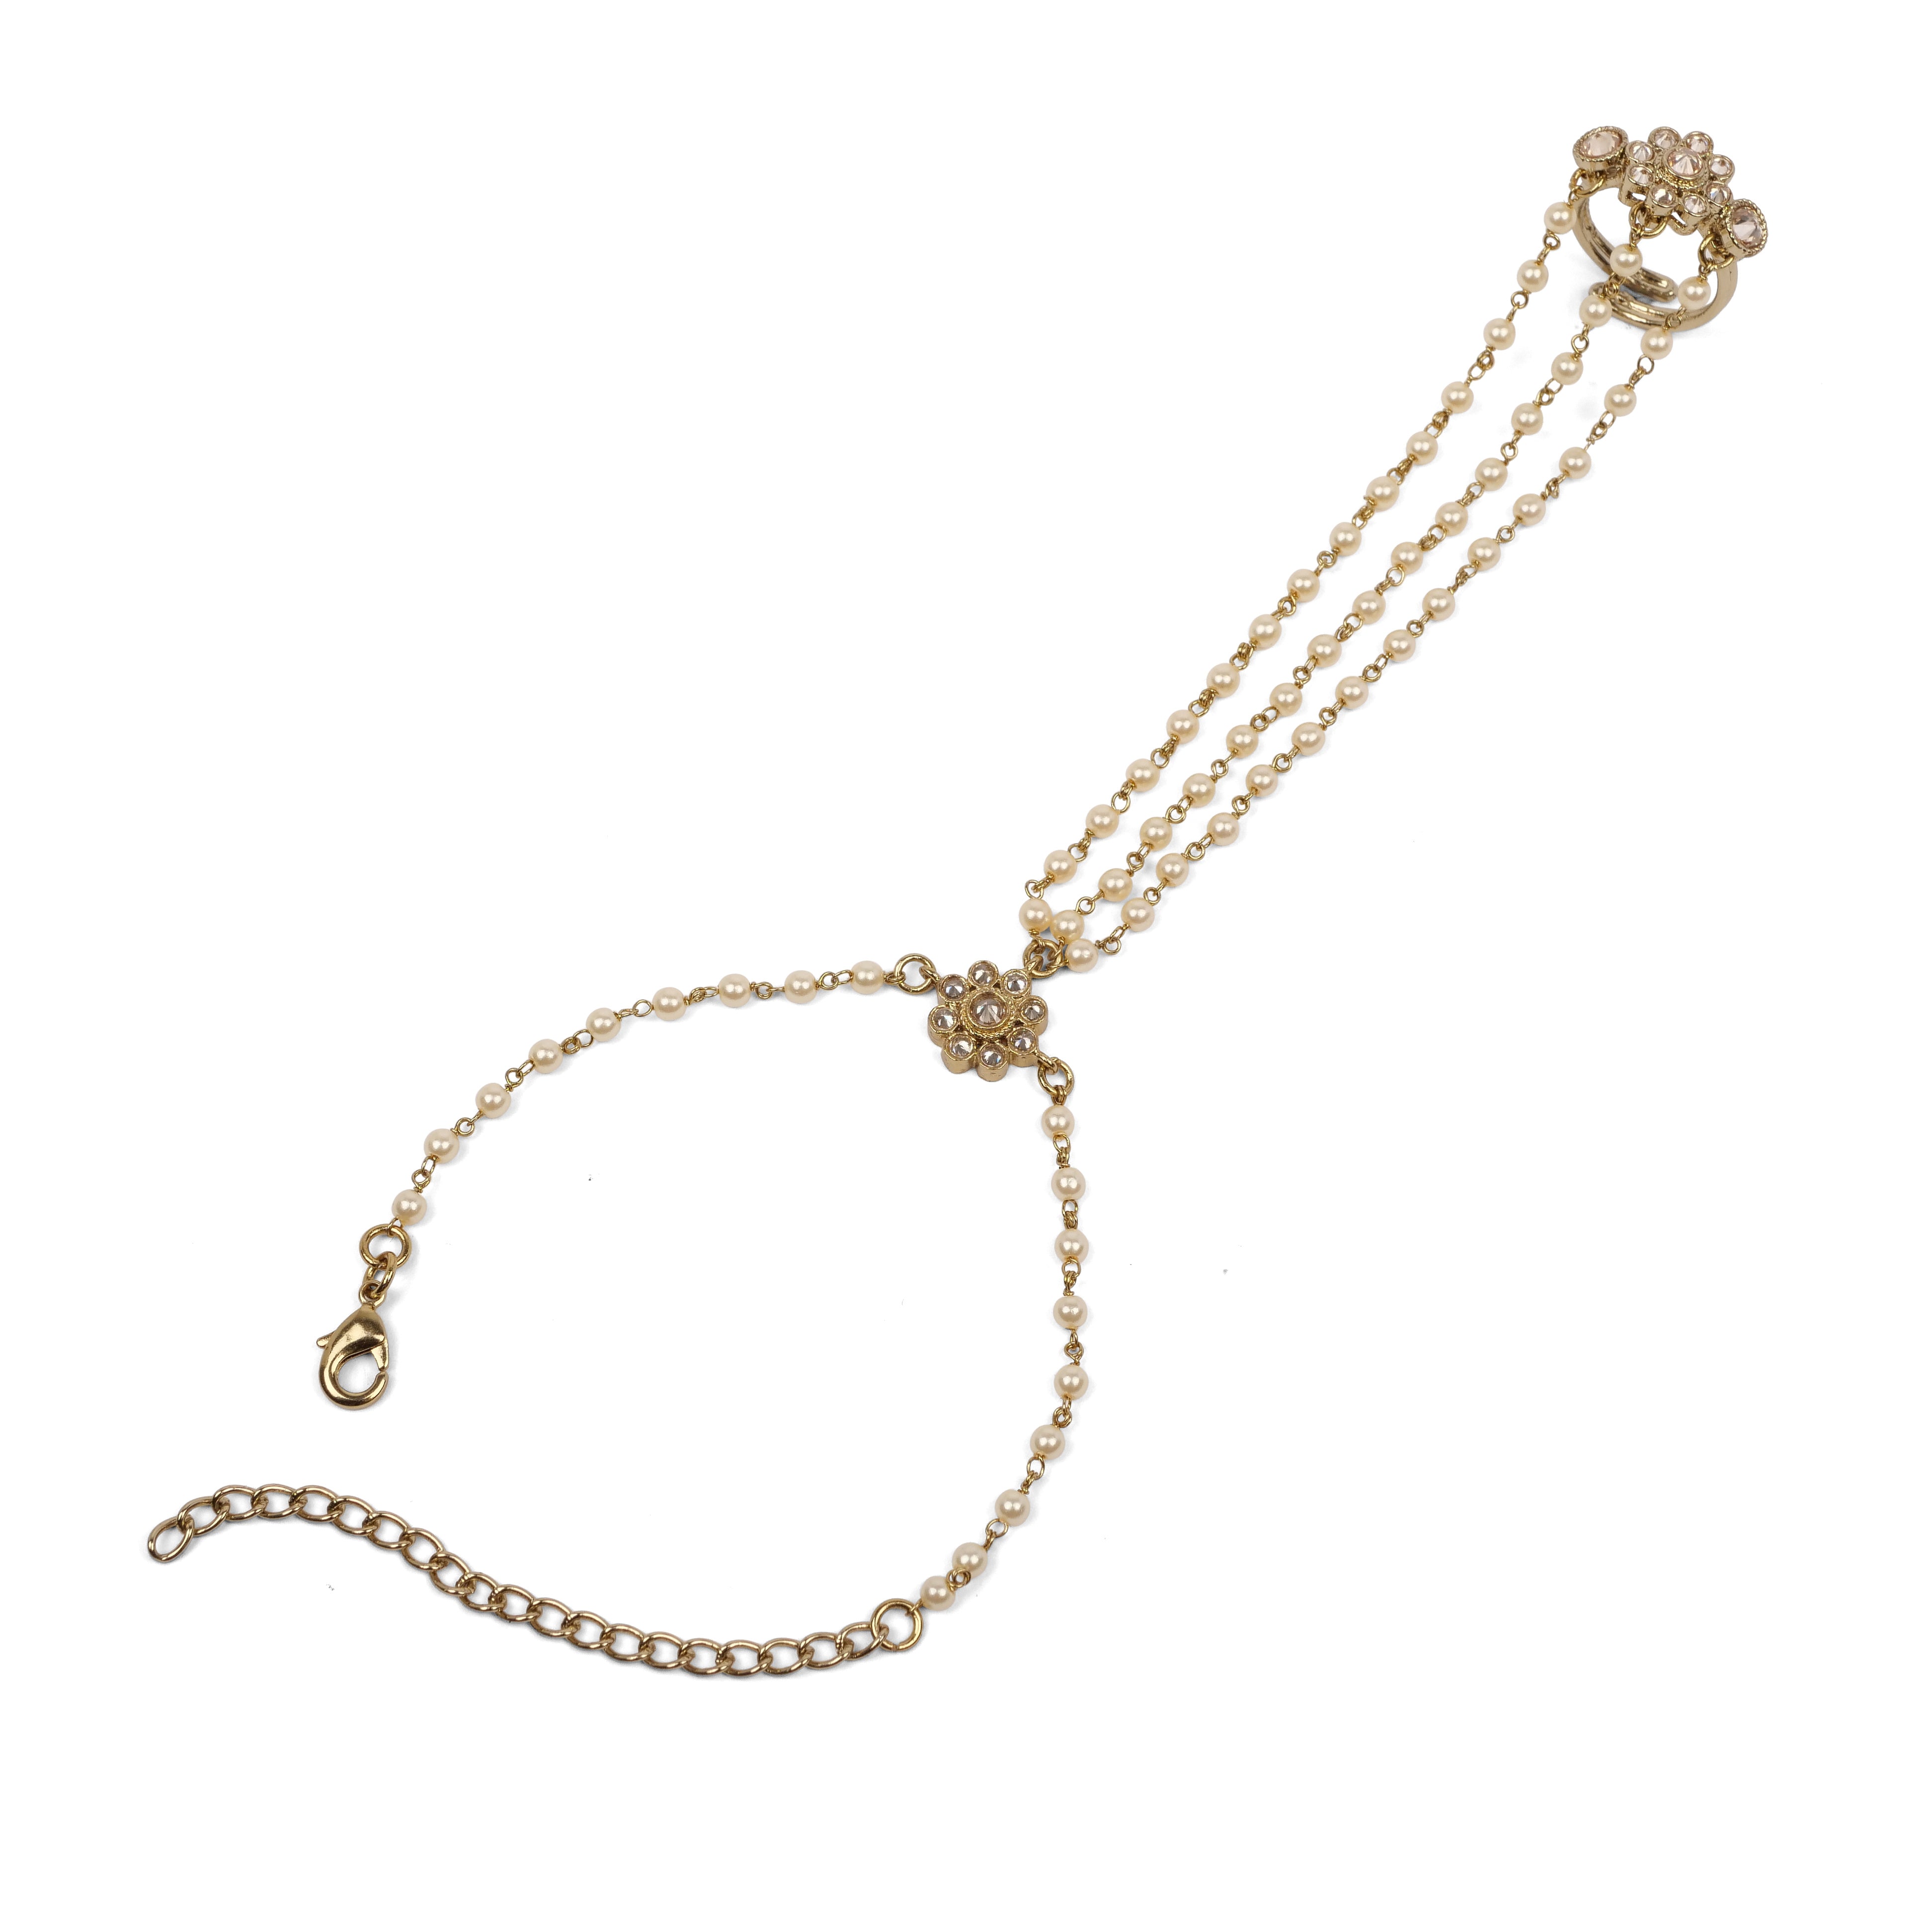 Forever Floral Triple Hand Chain in Light Topaz